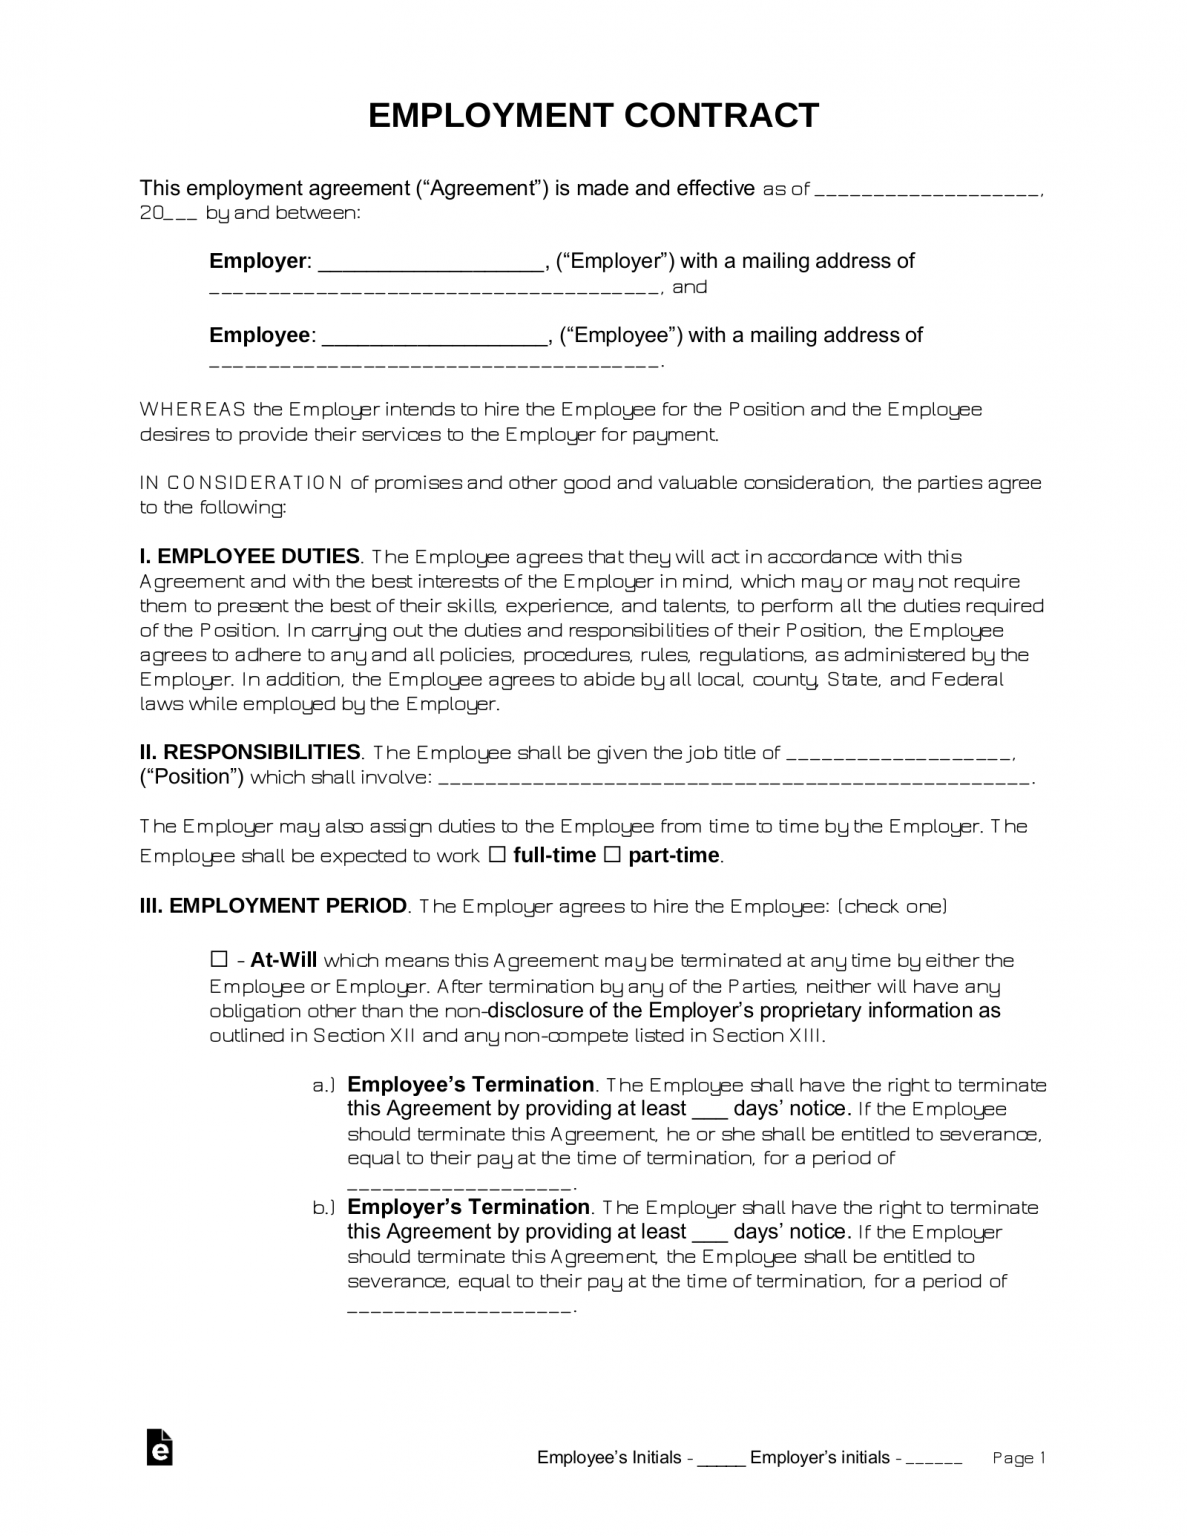 free-employment-contract-template-word